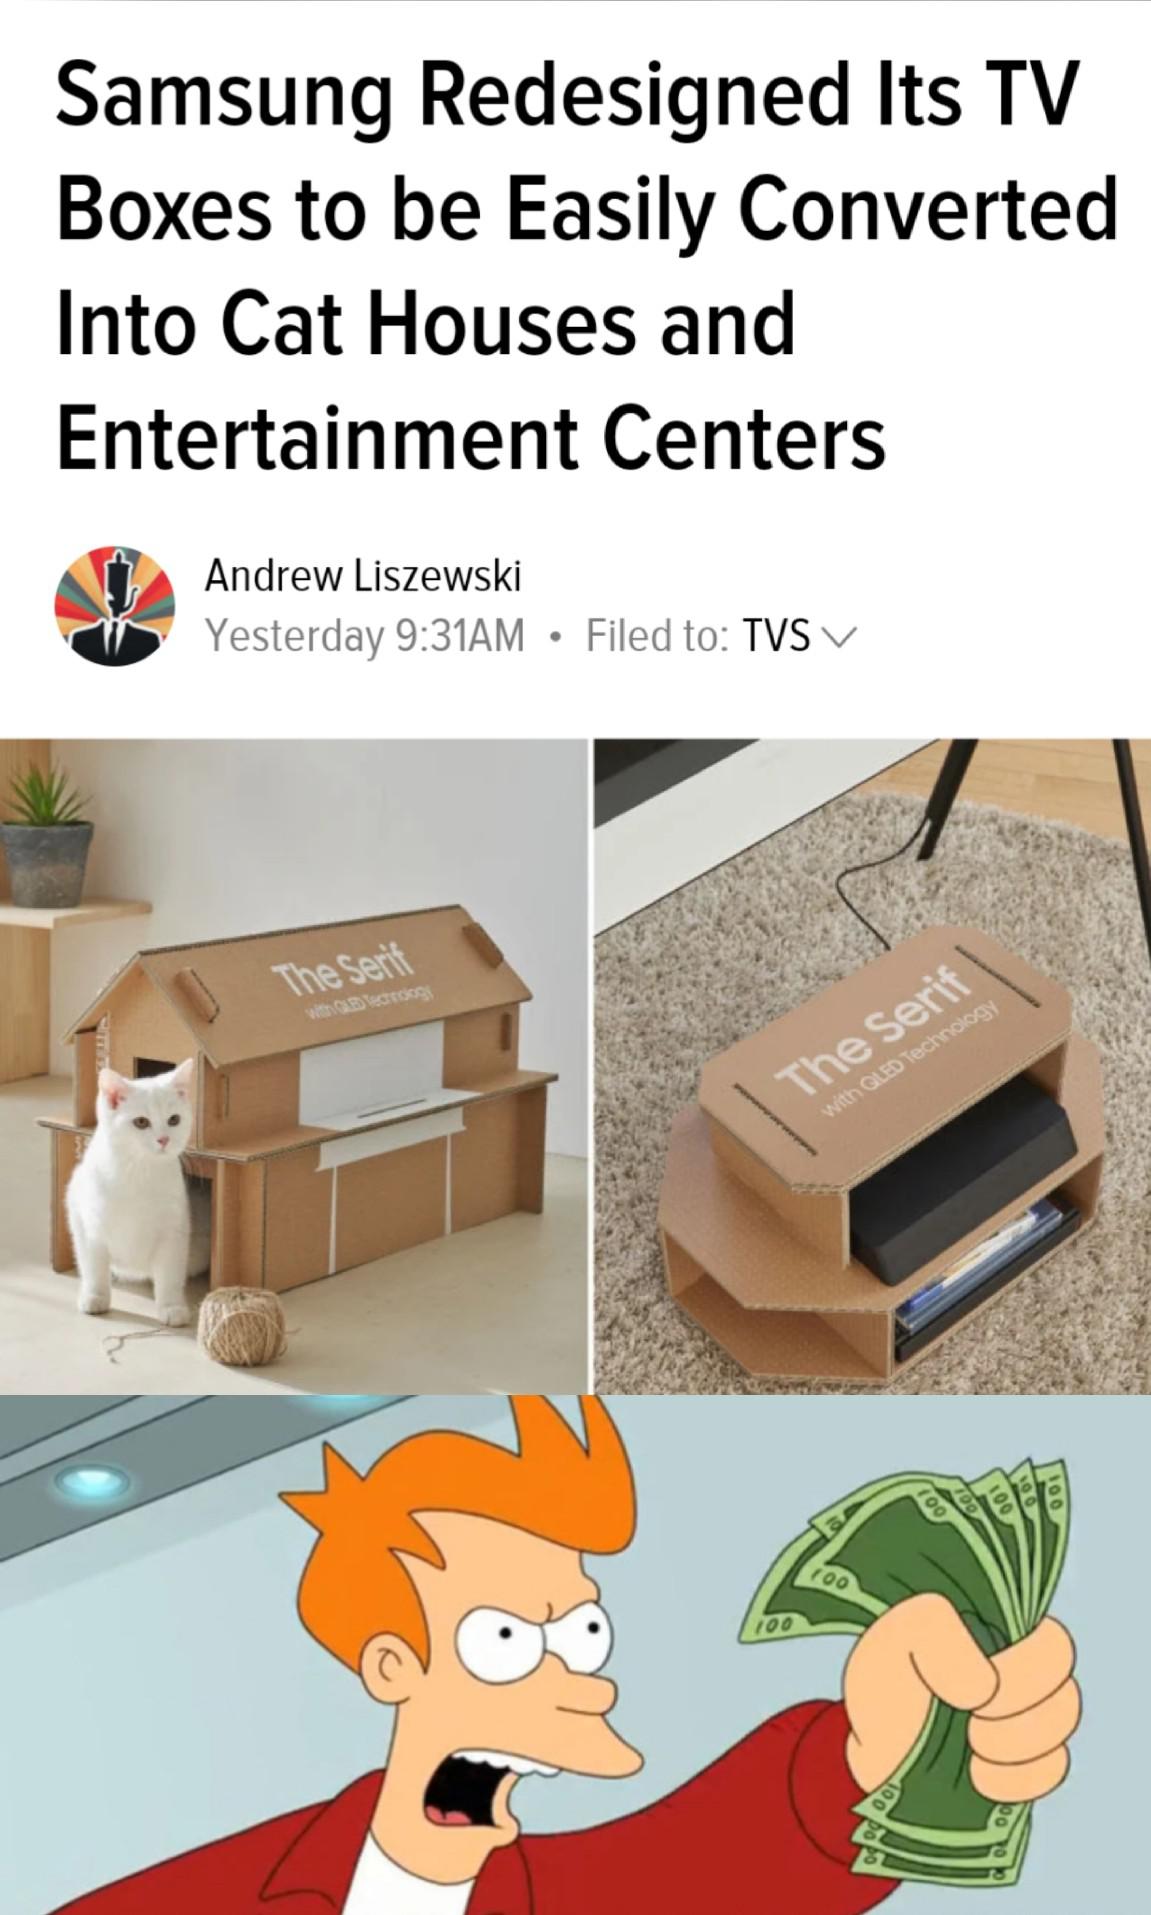 up and take my money - Samsung Redesigned Its Tv Boxes to be Easily Converted Into Cat Houses and Entertainment Centers Andrew Liszewski Yesterday Am Filed to Tvs V The Serit The Serif with Qled Technology 100 Oo 100 100 100 po Colo